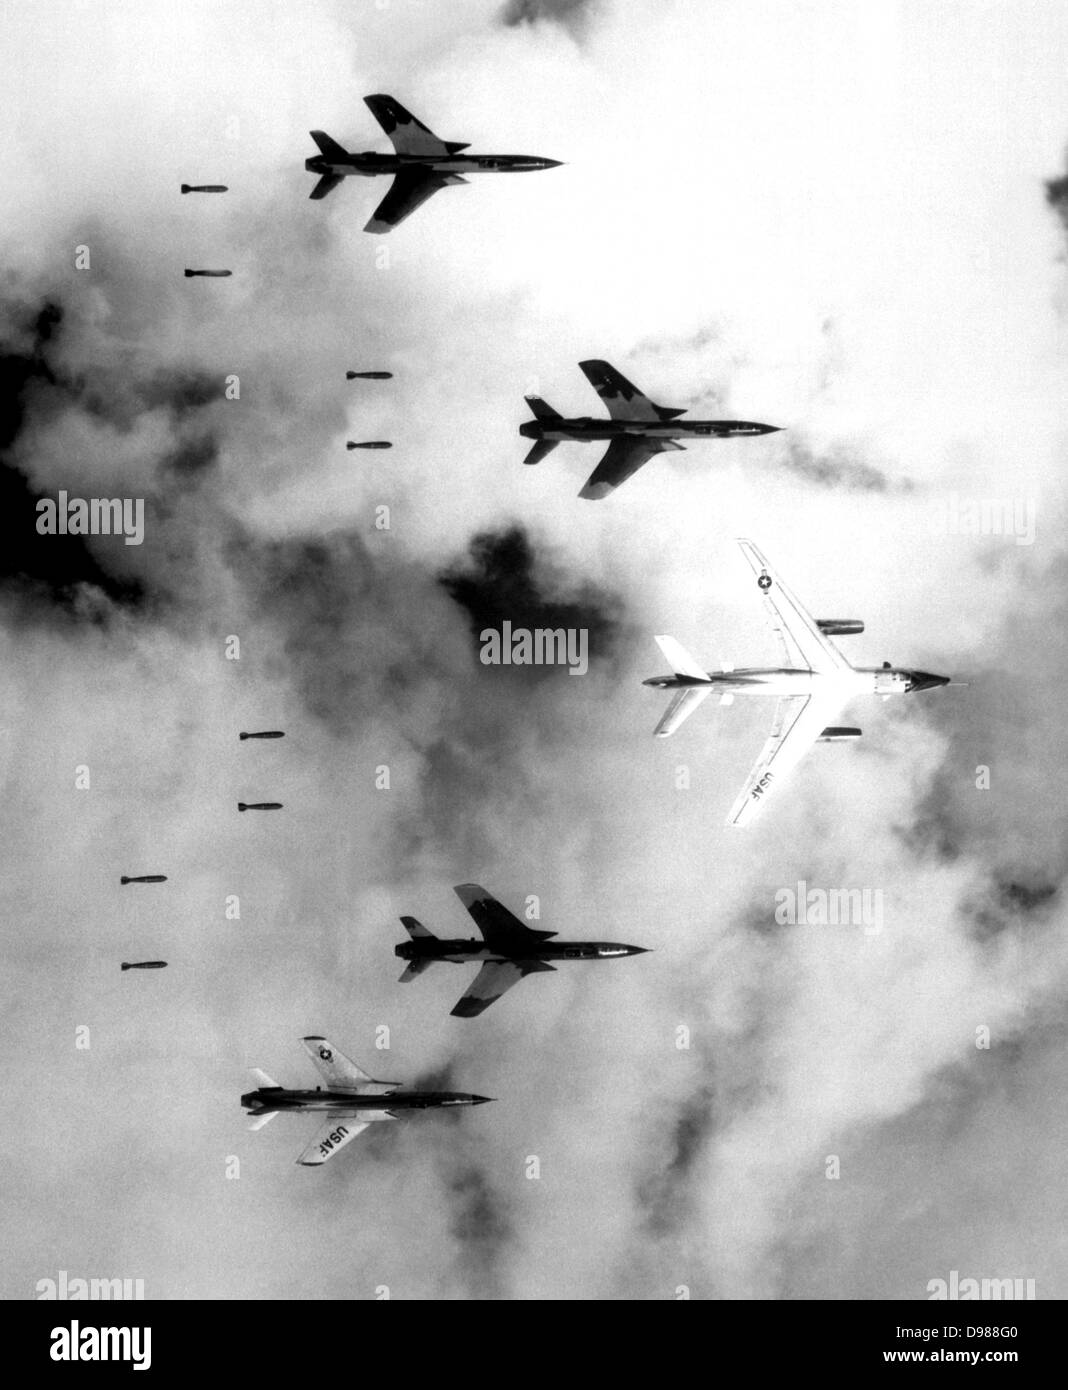 Flying under radar control with a B-66 Destroyer, Air Force F-105 Thunderchief pilots bomb a military target through low clouds over the southern panhandle of North Vietnam, 14 June 1966. Stock Photo